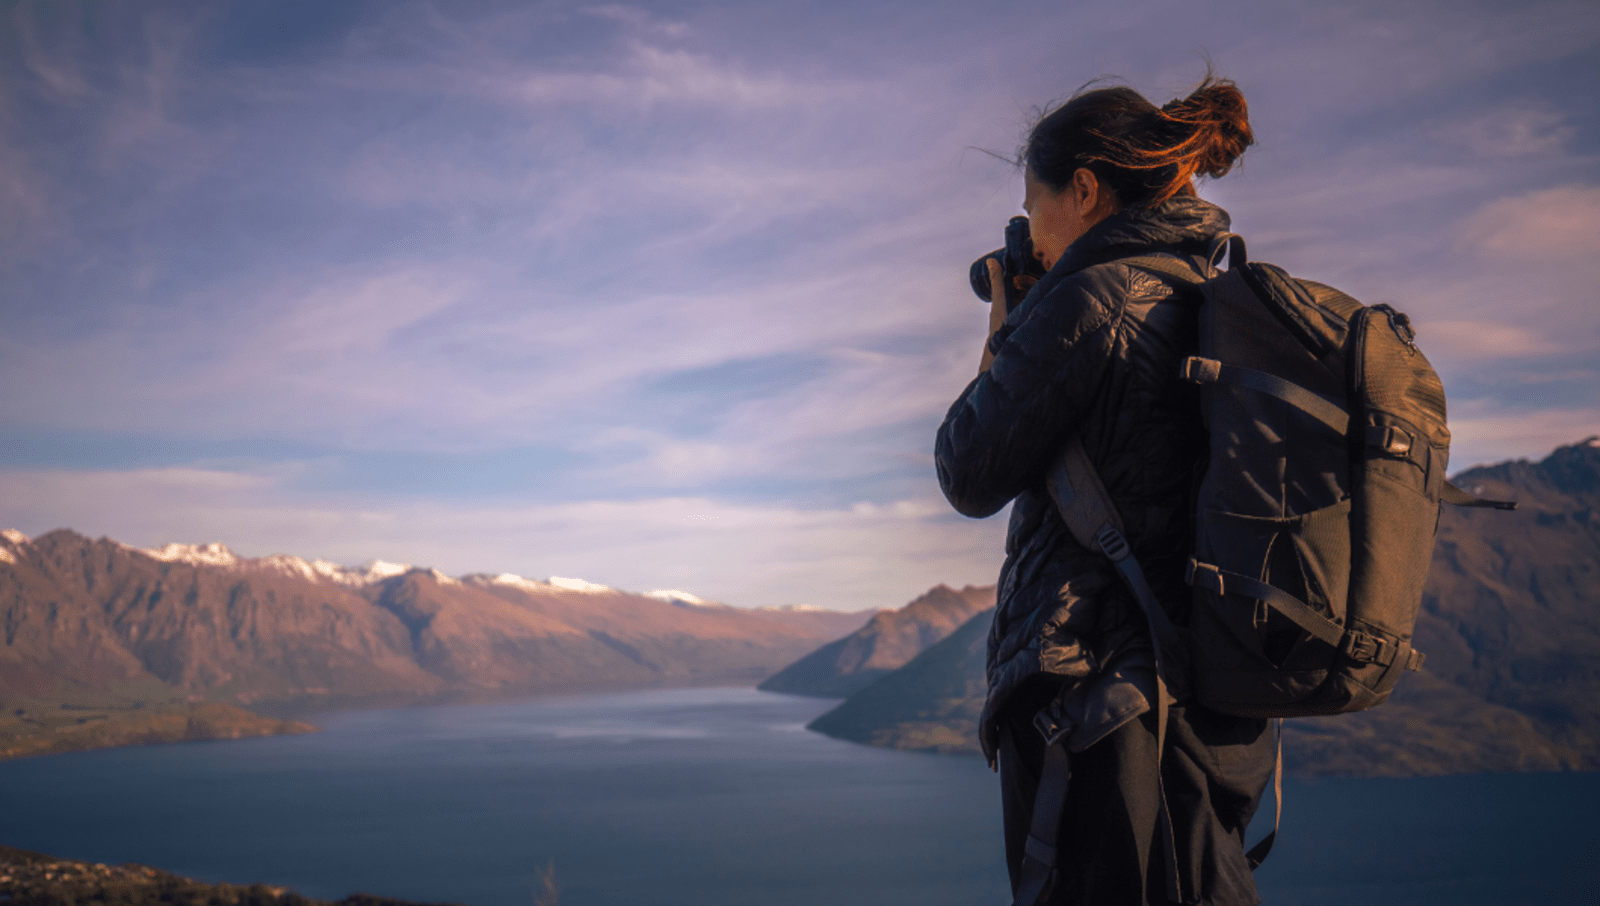 Lady taking a photo on top of a mountain overlooking other mountains